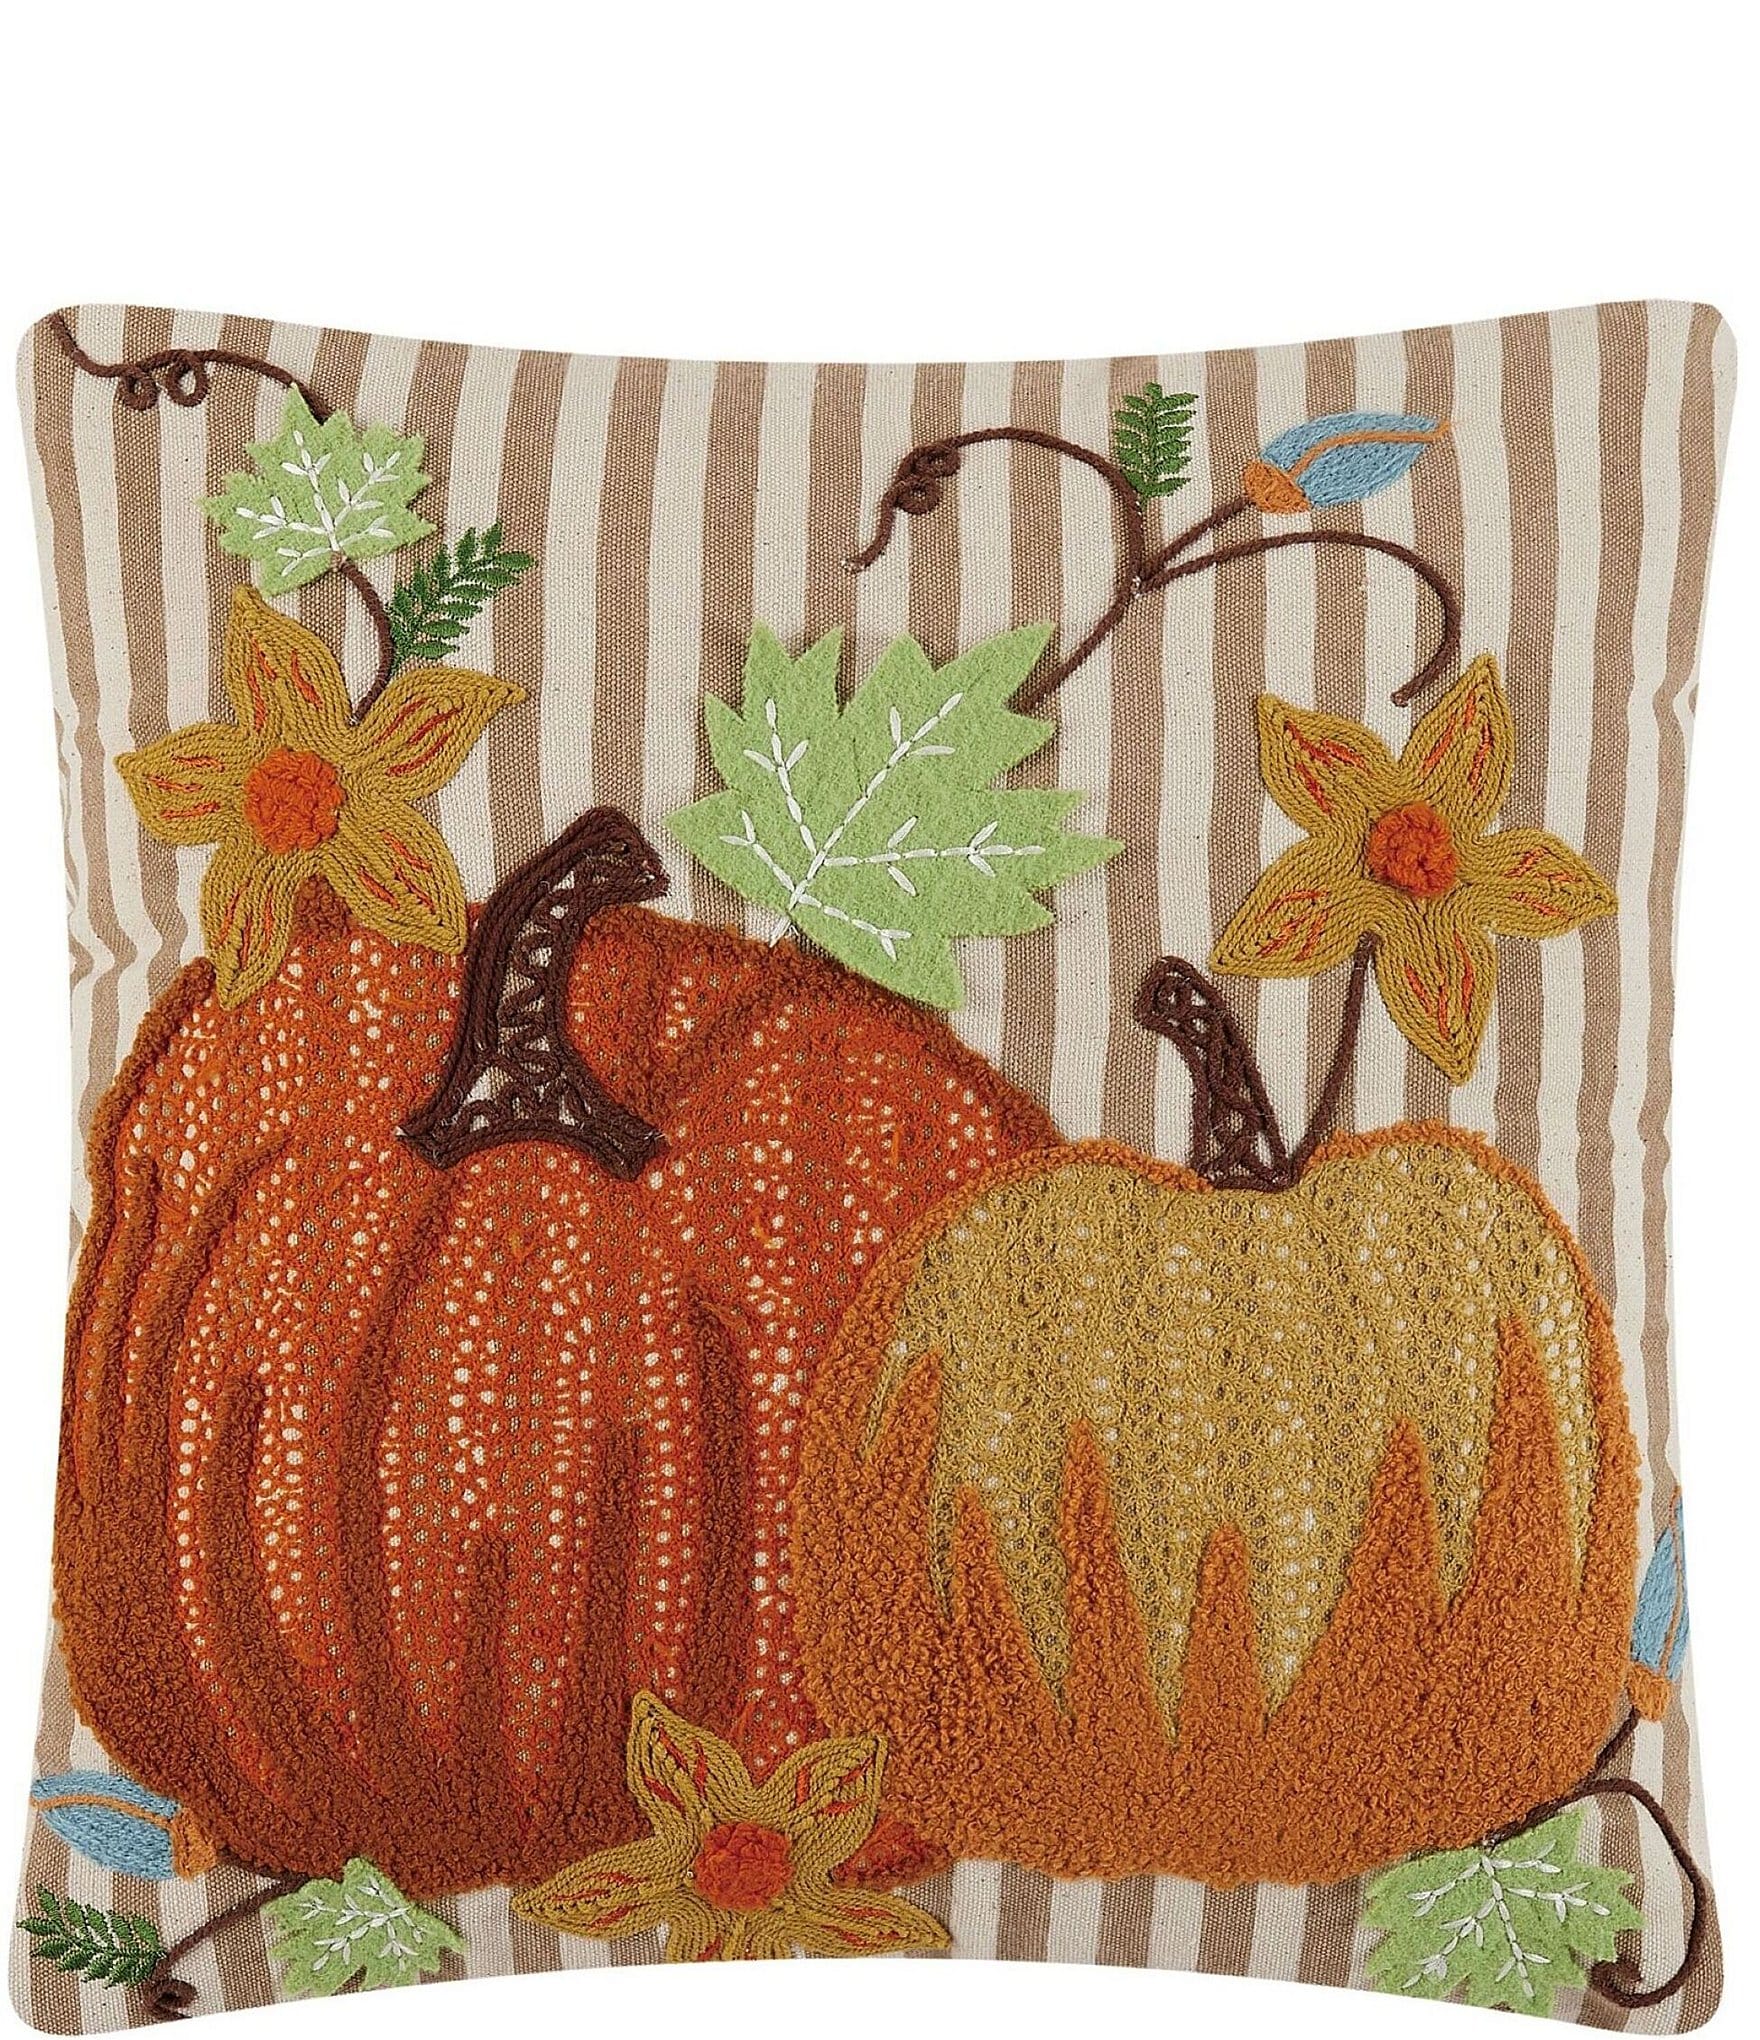 Knit Pumpkin Square Throw Pillow With Fringe